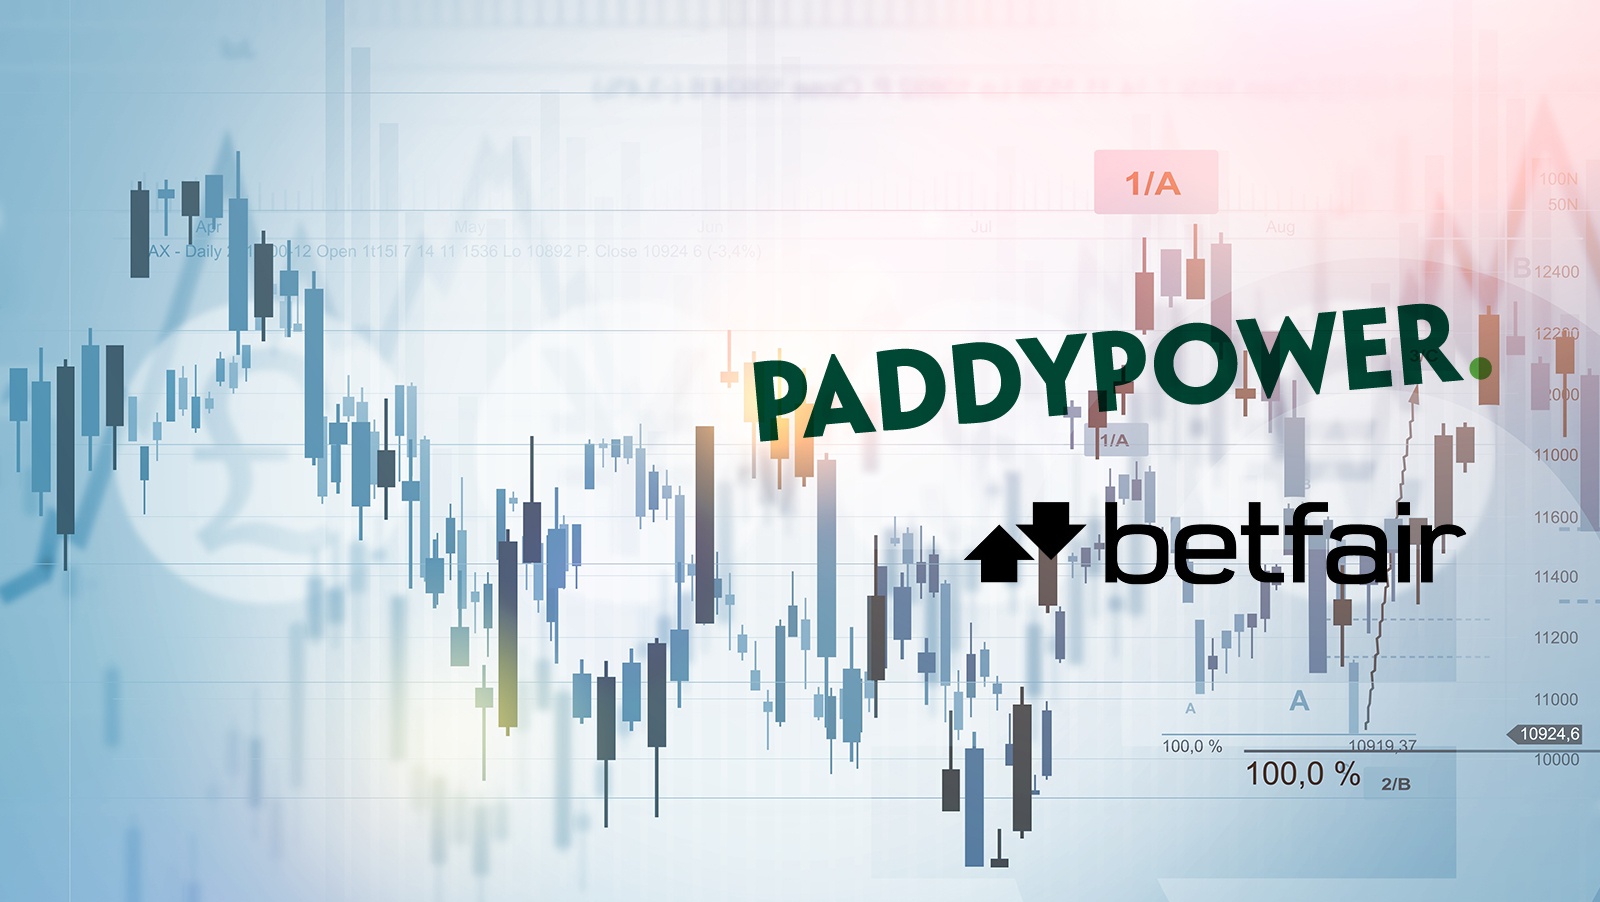 Paddy Power Betfair and the difficulty of picking exact bottoms